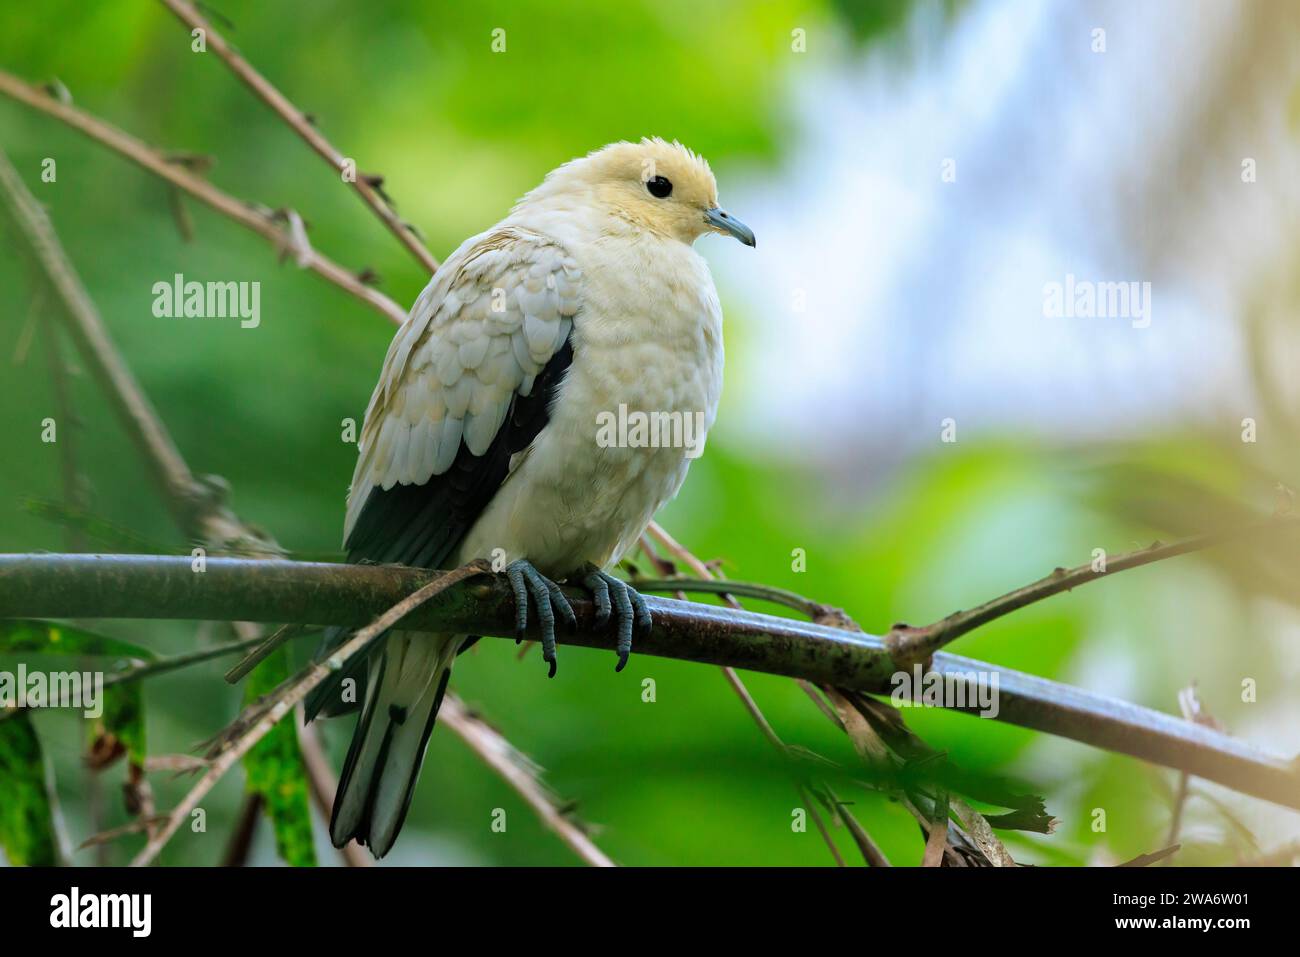 Closeup of a pied imperial pigeon, Ducula bicolor, perched in a rainforest Stock Photo